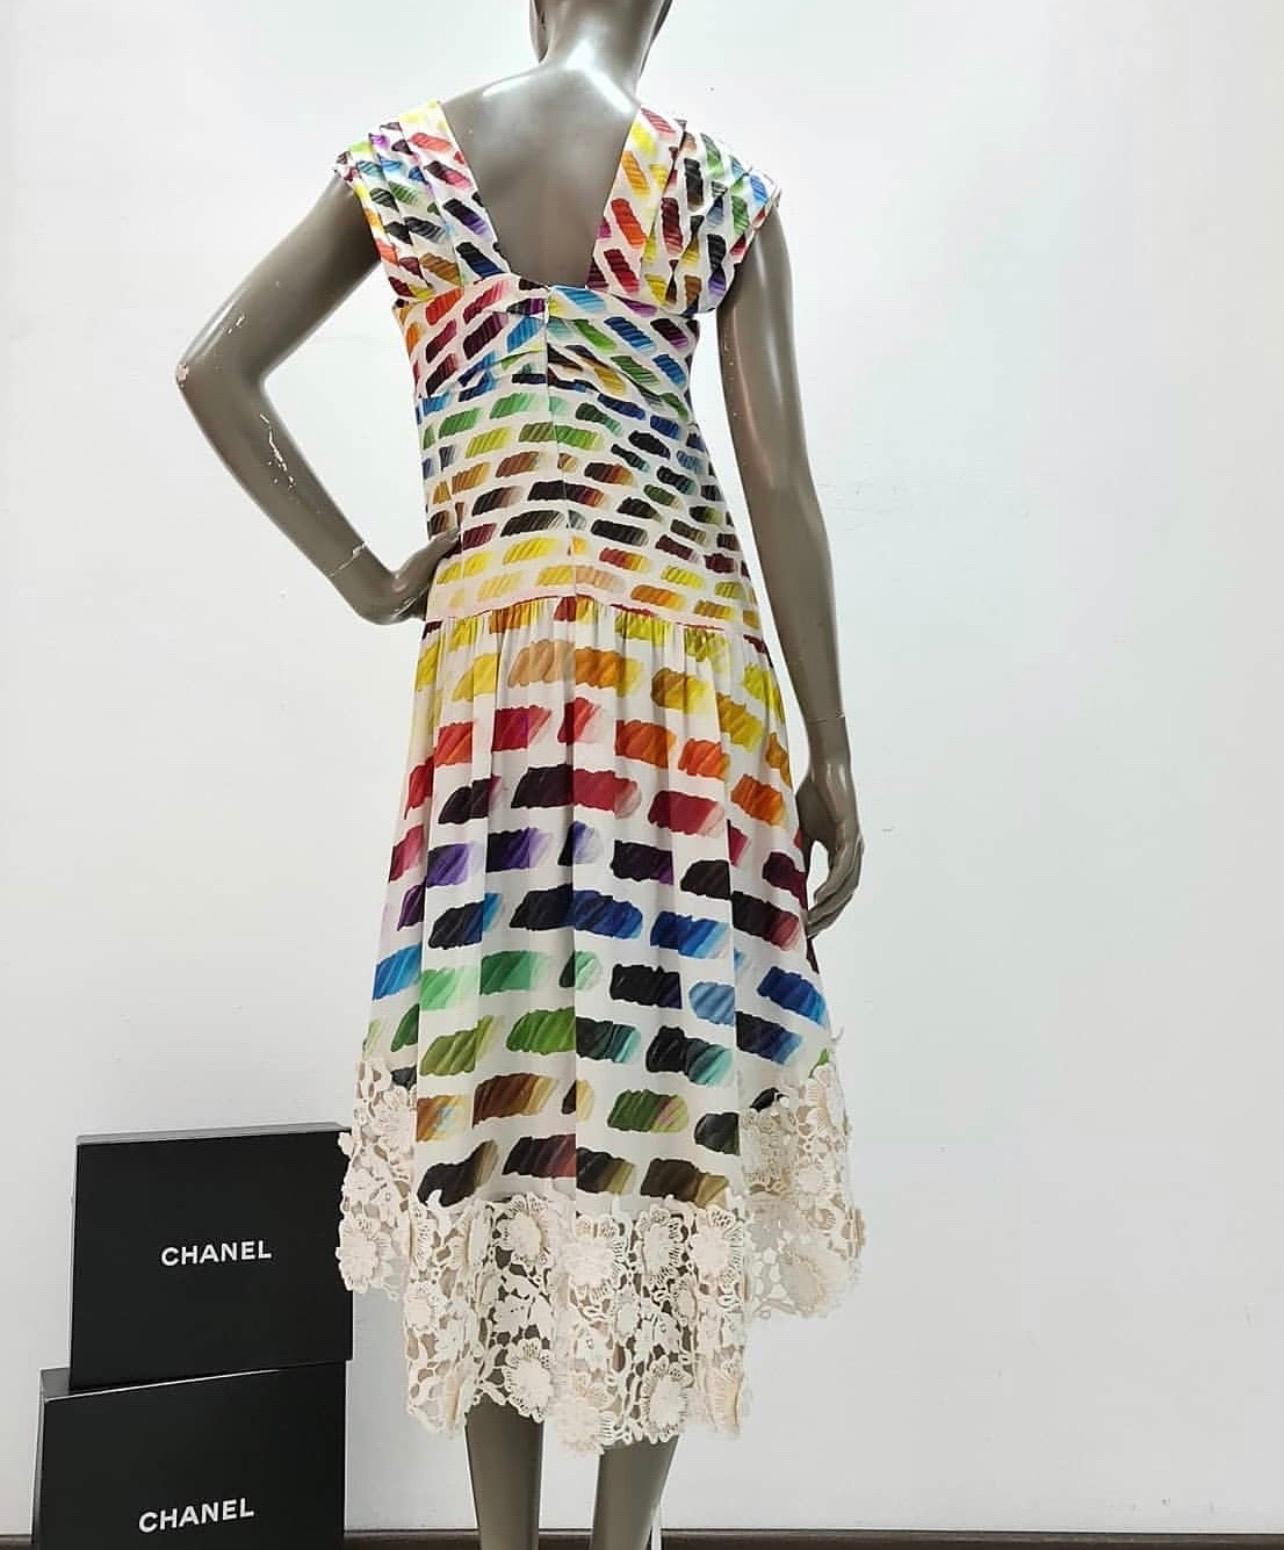 Lace rainbow dress by Chanel Spring 2014 RTW collection.

Silk dress Floral lace trim.

Rainbow color swatch pattern.

Zip back and snap closure.

Asymmetrical high-low bottom hem 100% silk

Condition is very good.

Size 40

For buyers from EU we